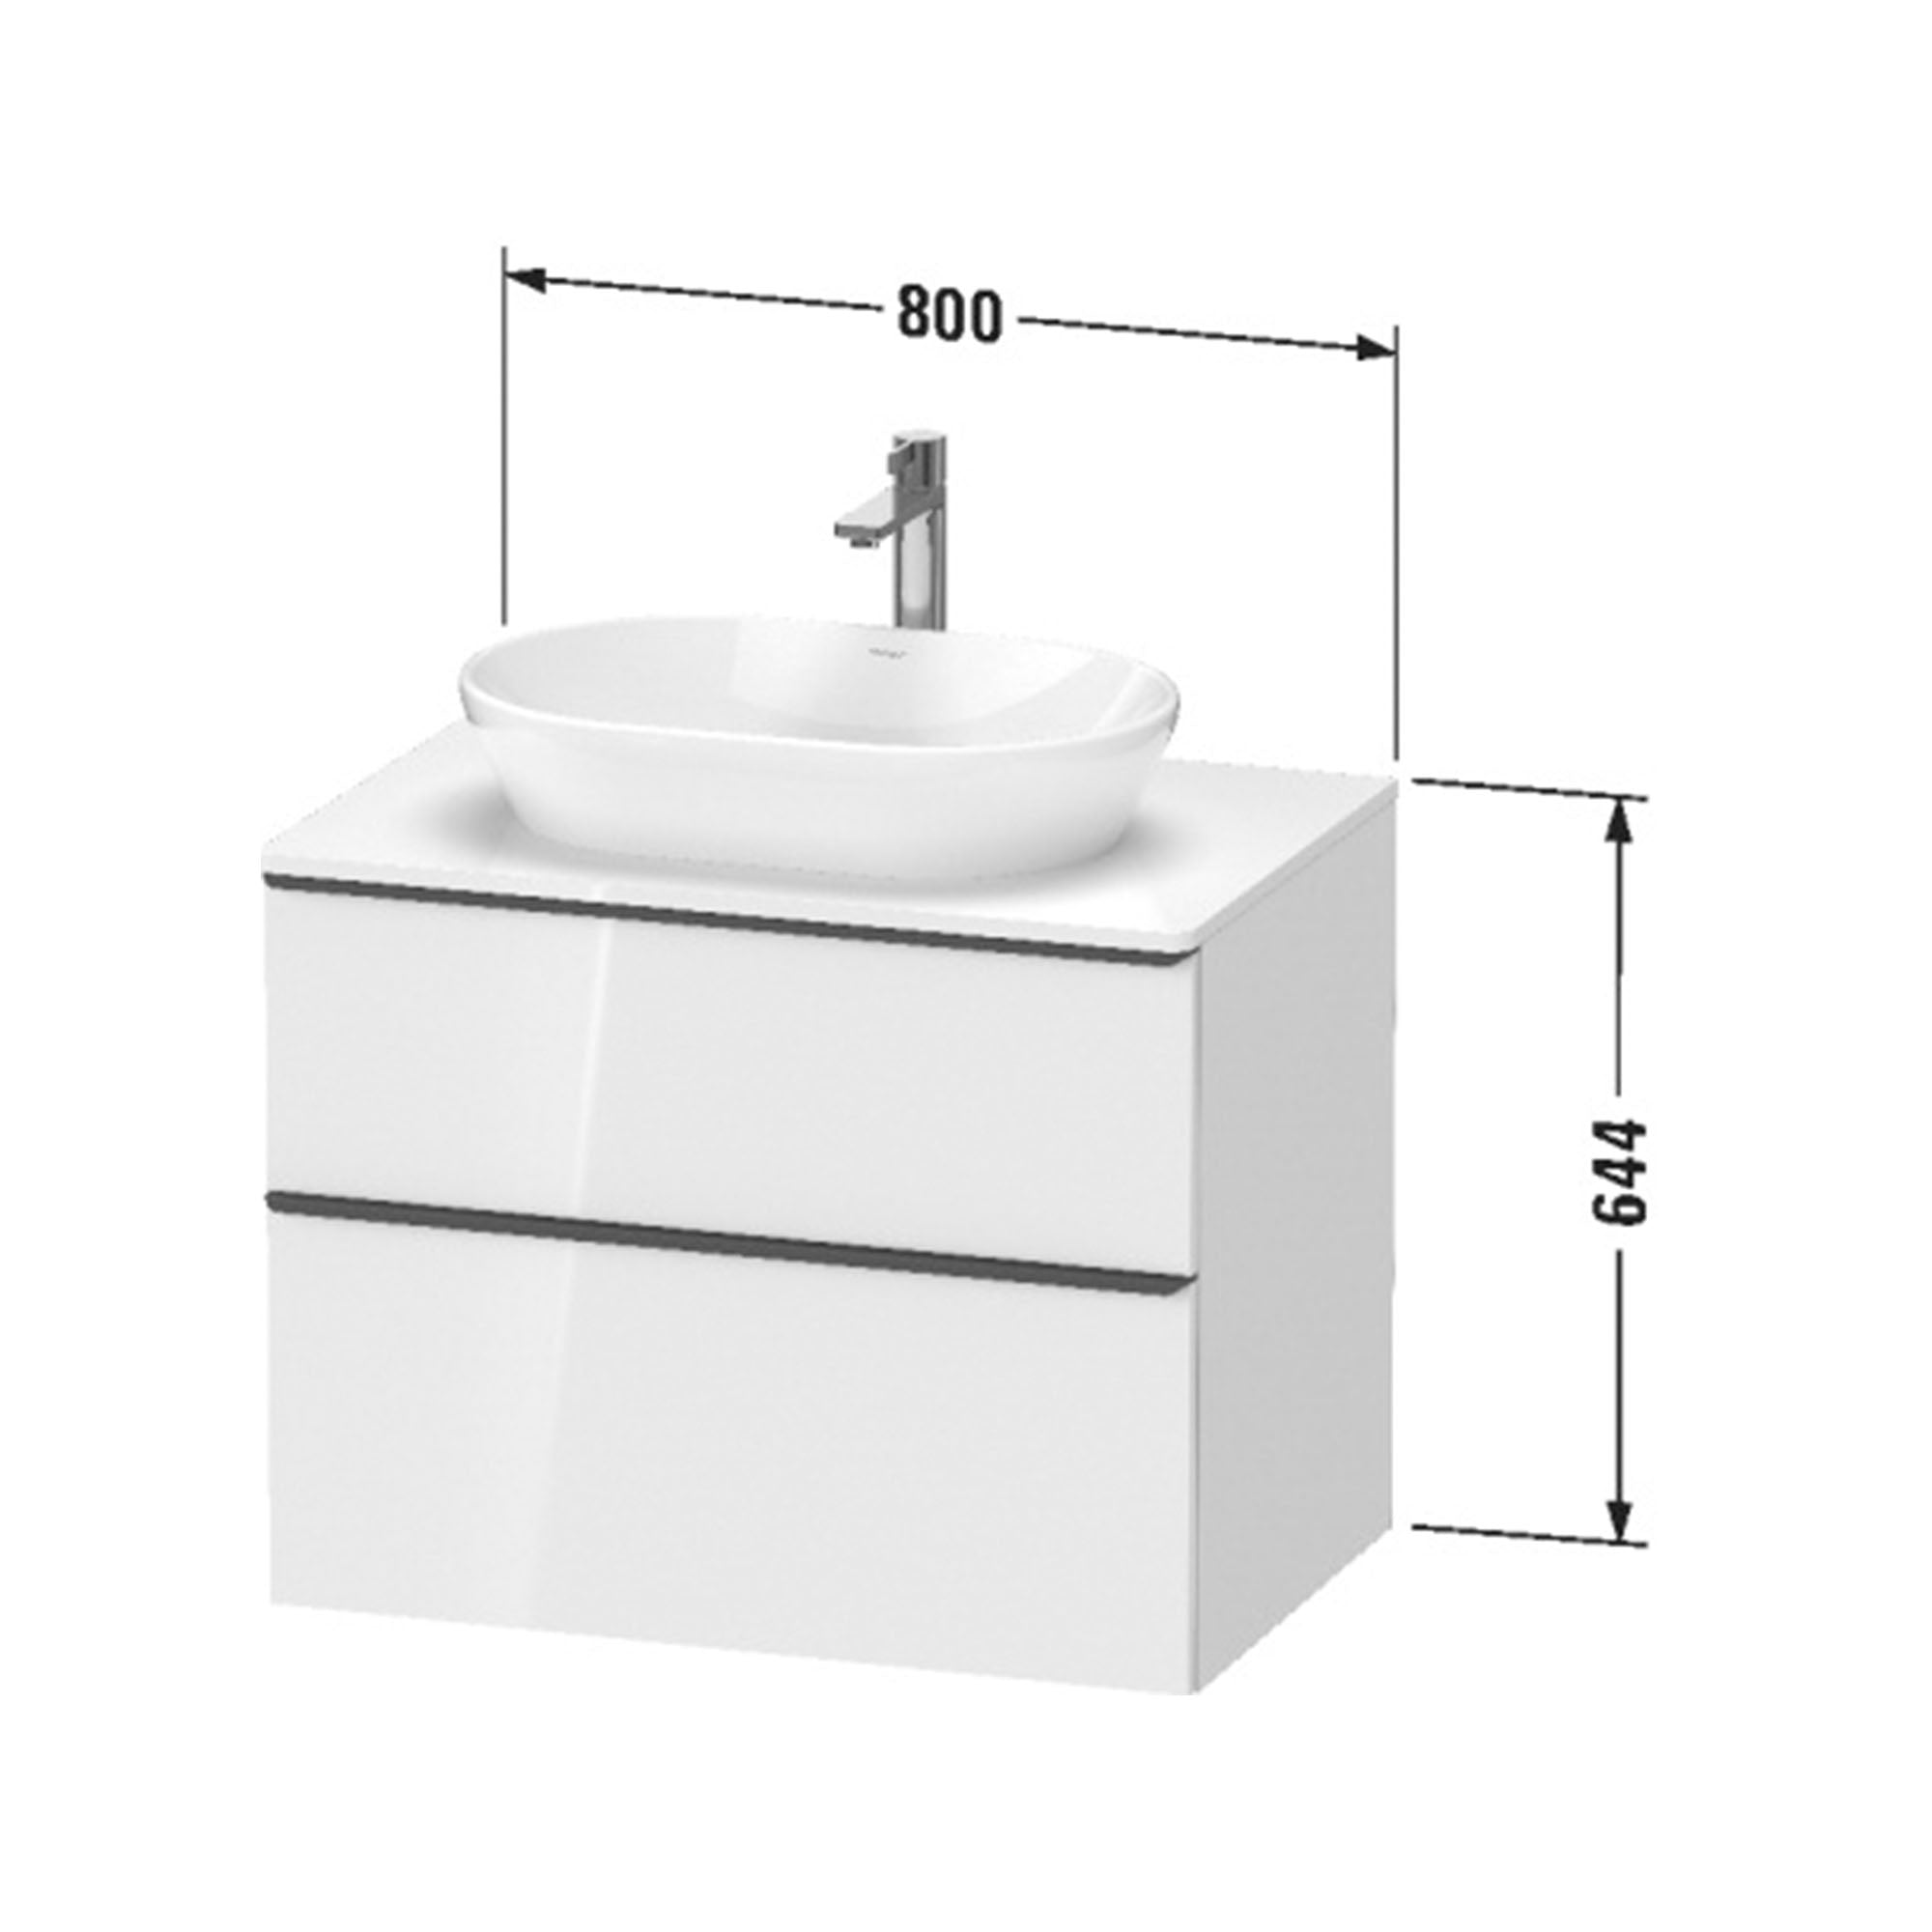 duravit d-neo 800 wall mounted vanity unit with worktop